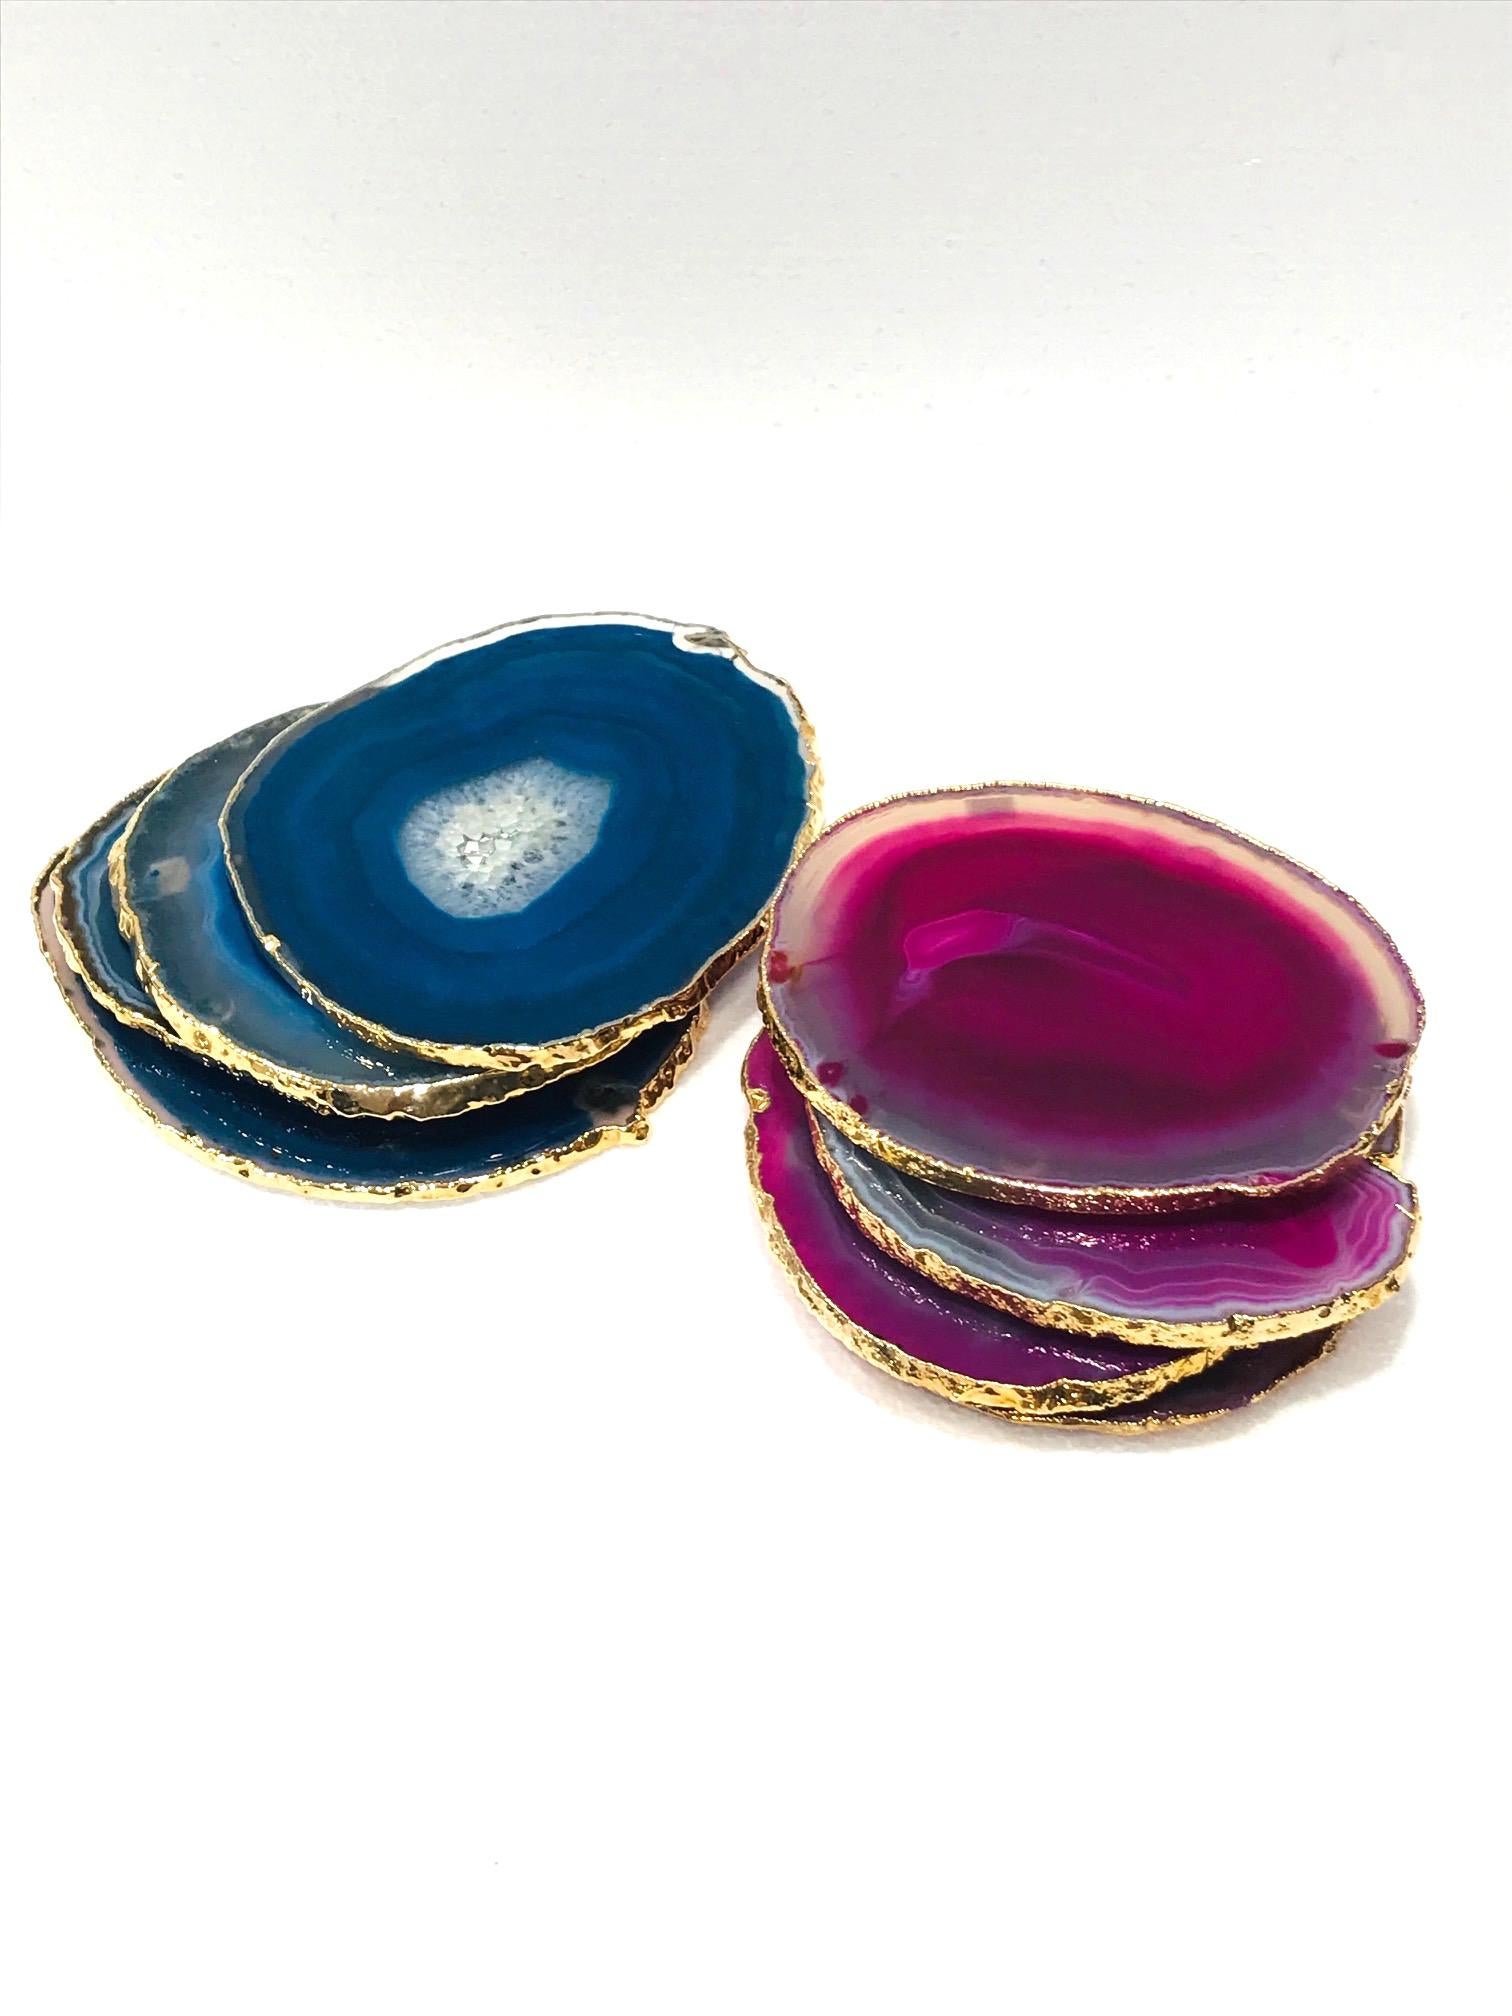 Contemporary Semi-Precious Gemstone Coasters in Pink and Turquoise with 24k Gold Trim, Set /8 For Sale